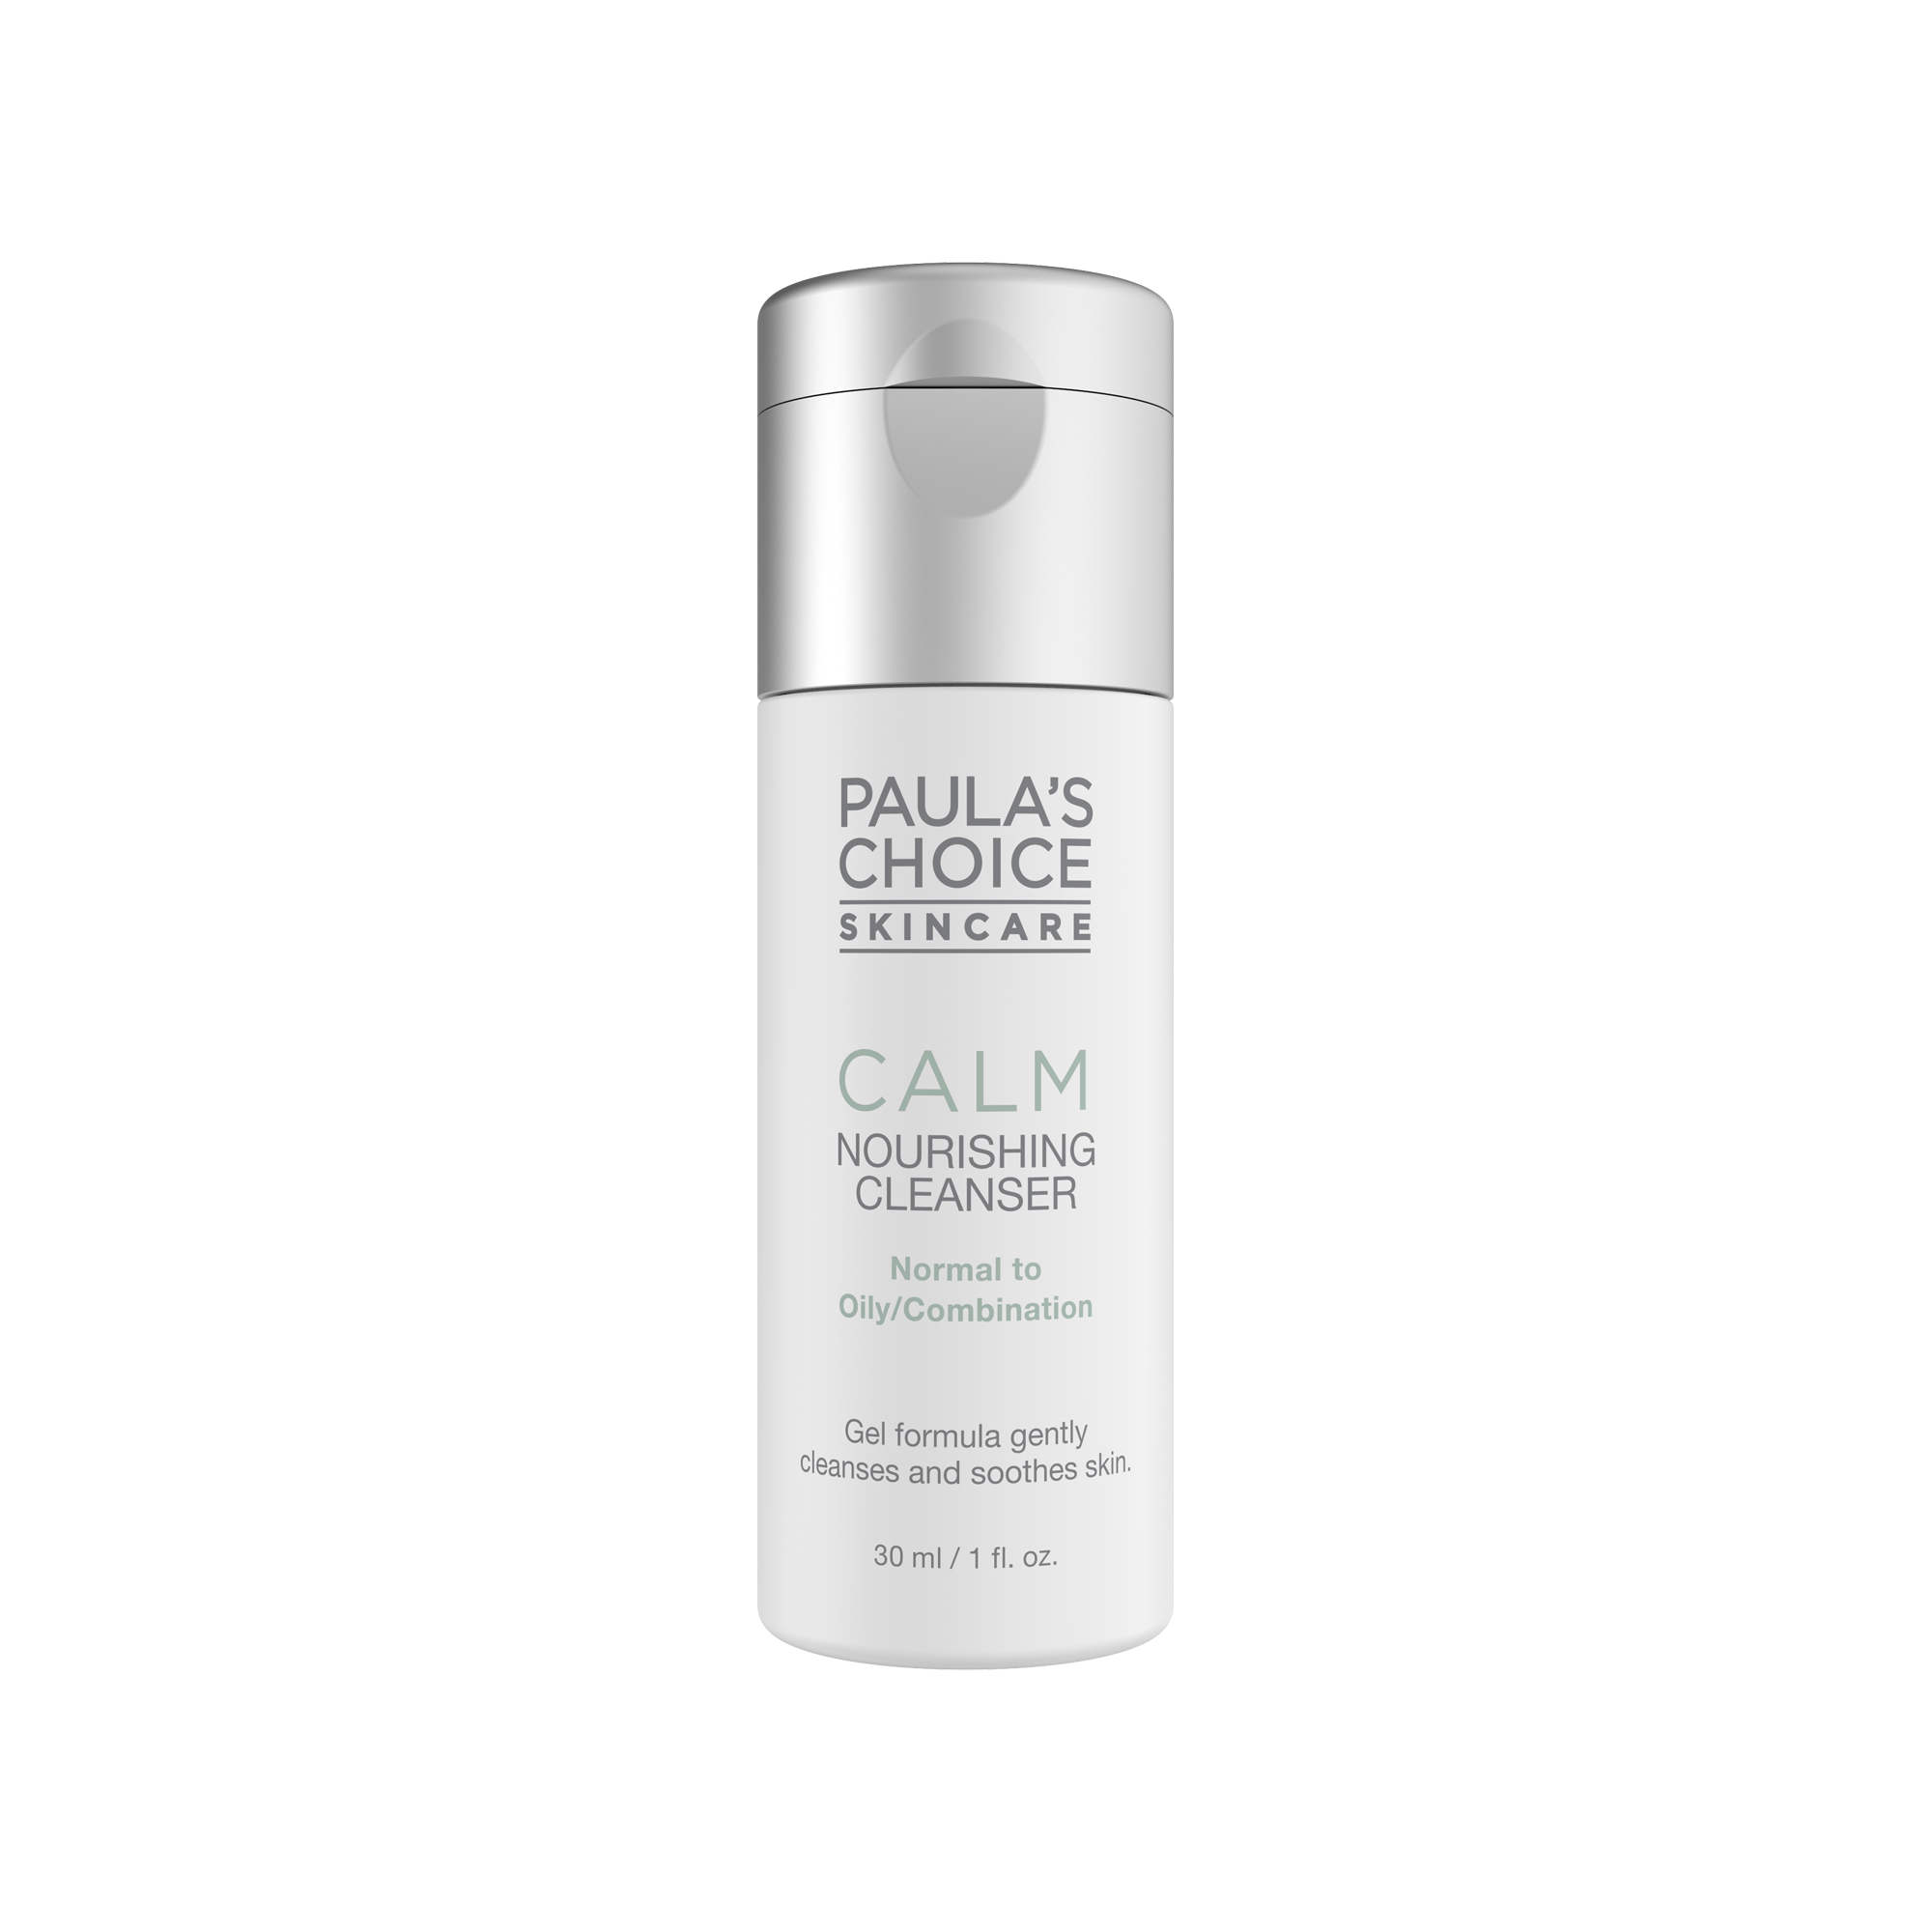 CALM Redness Relief Cleanser for Normal to Oily Skin | Paula's Choice